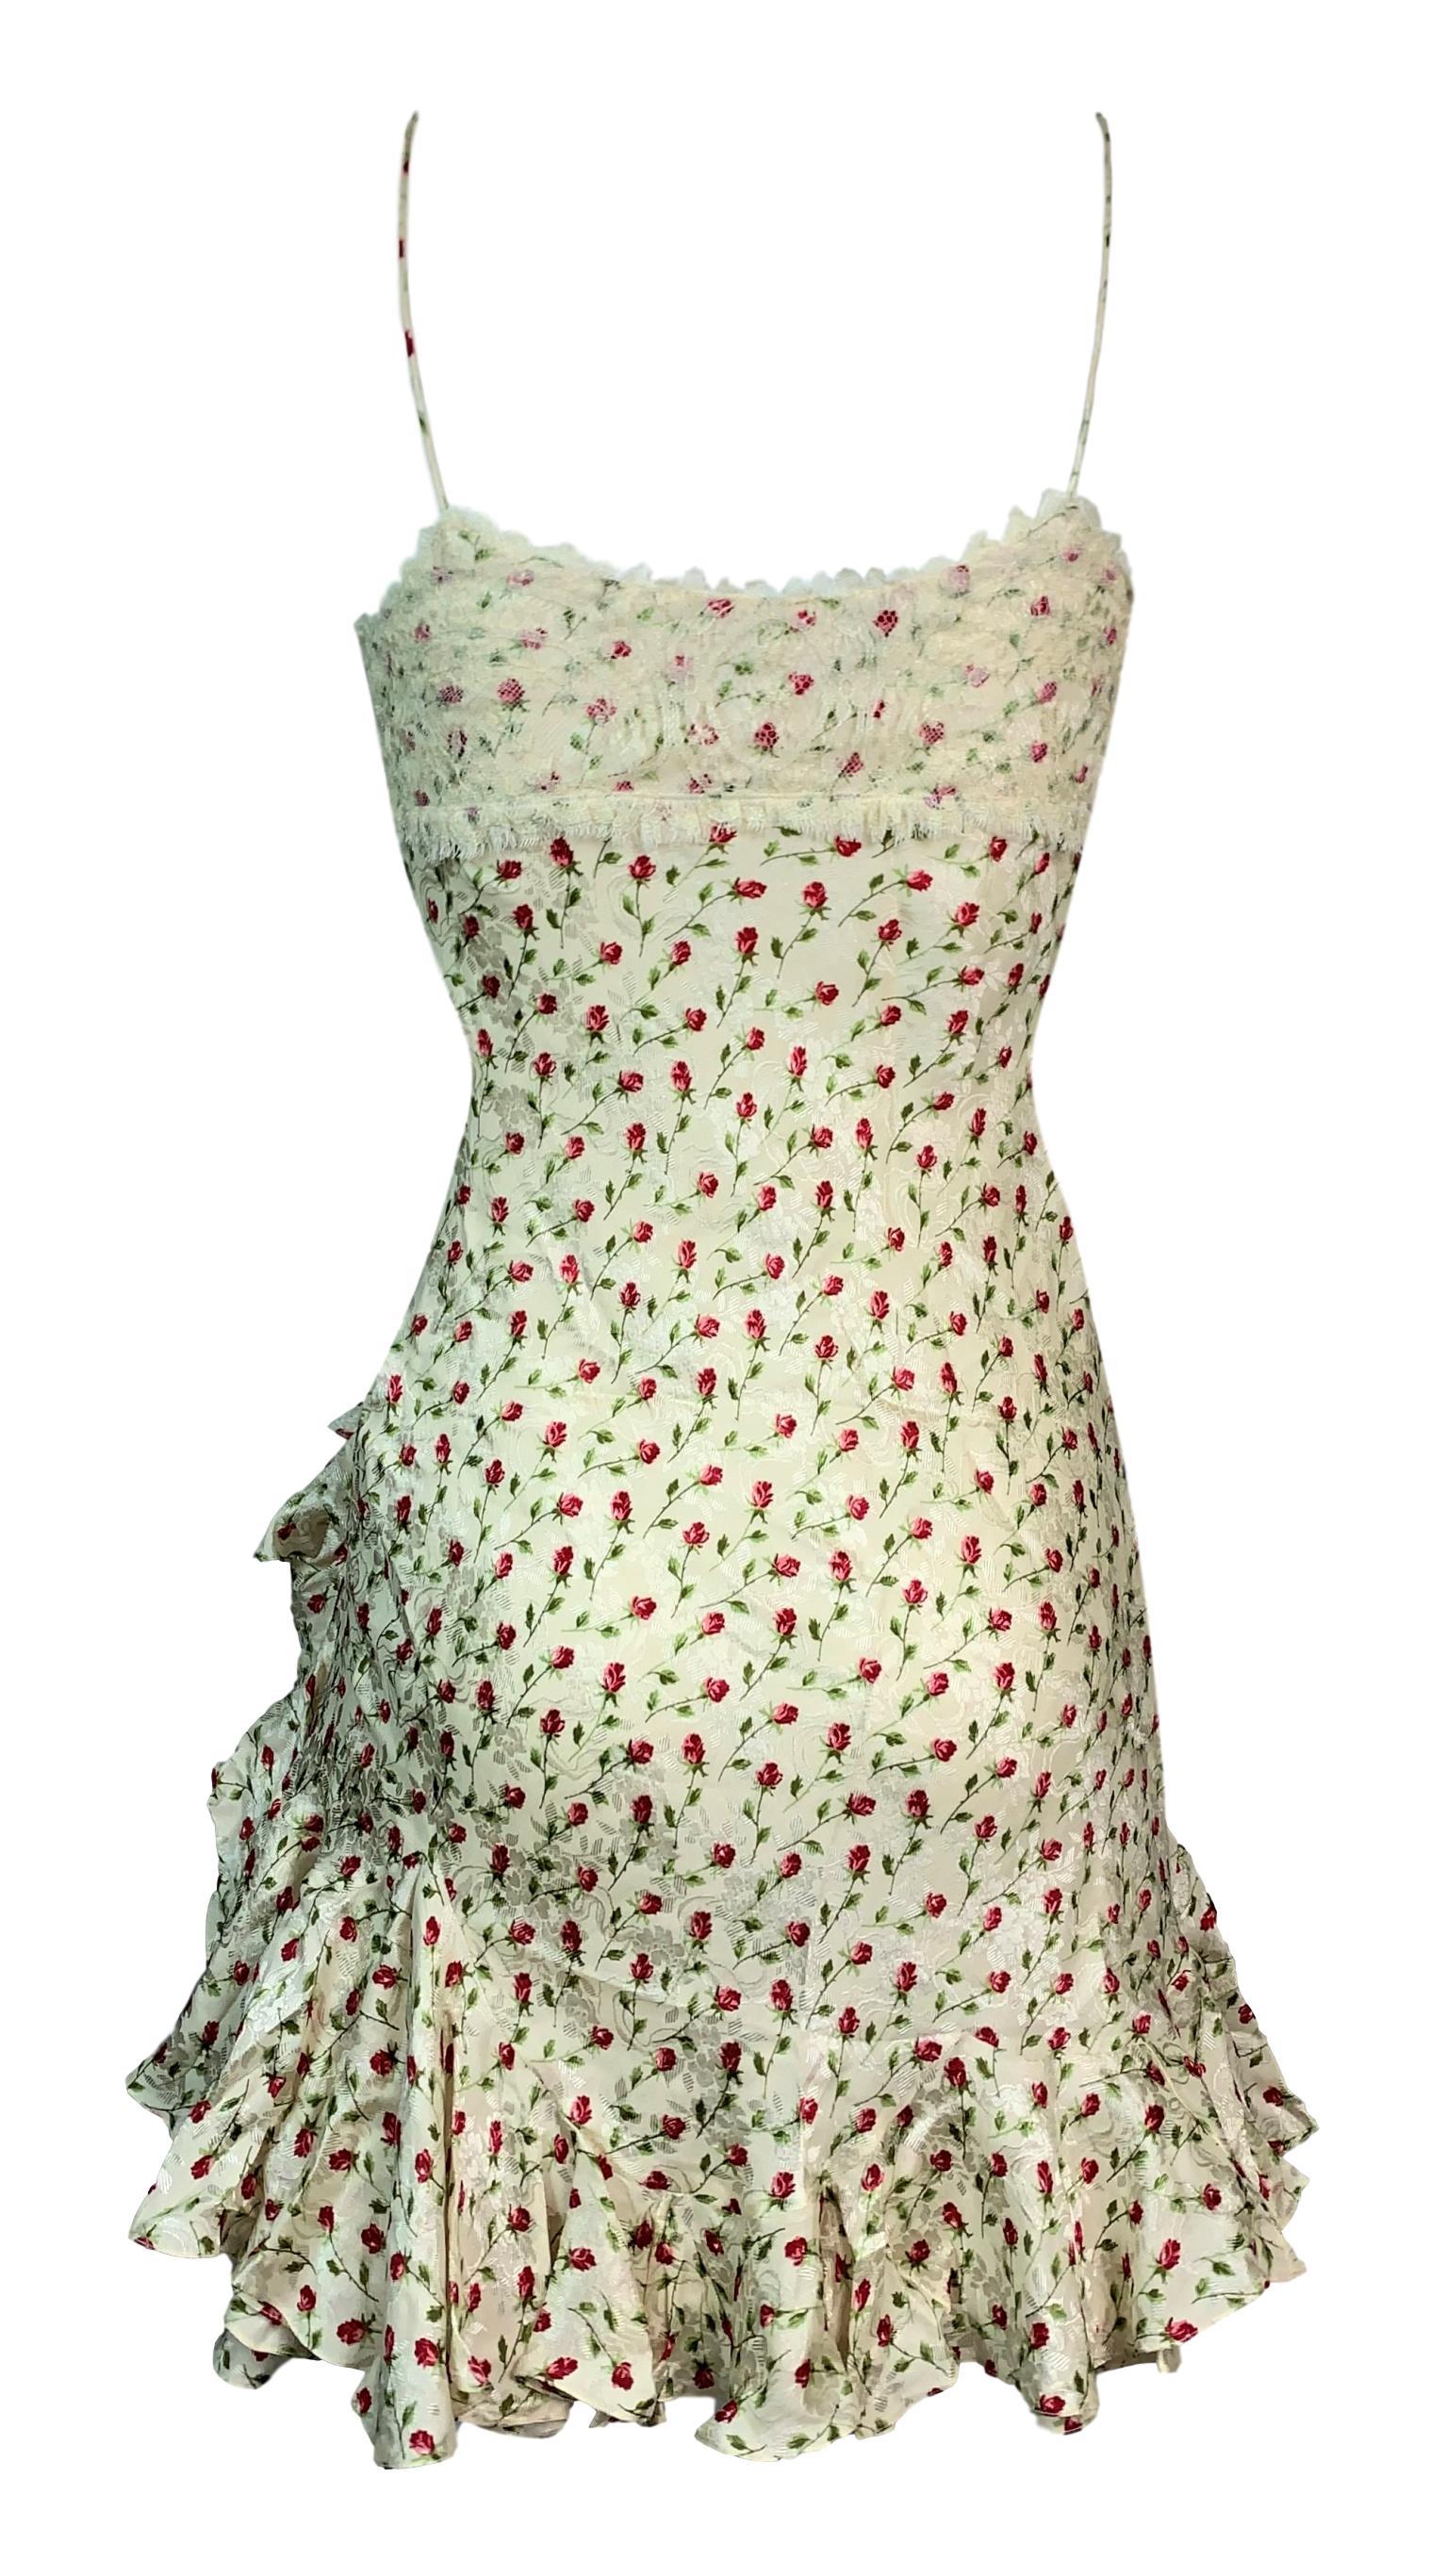 S/S 1997 John Galliano Ivory Silk Floral Can-Can High Slit Lace Mini Dress In Good Condition In Yukon, OK